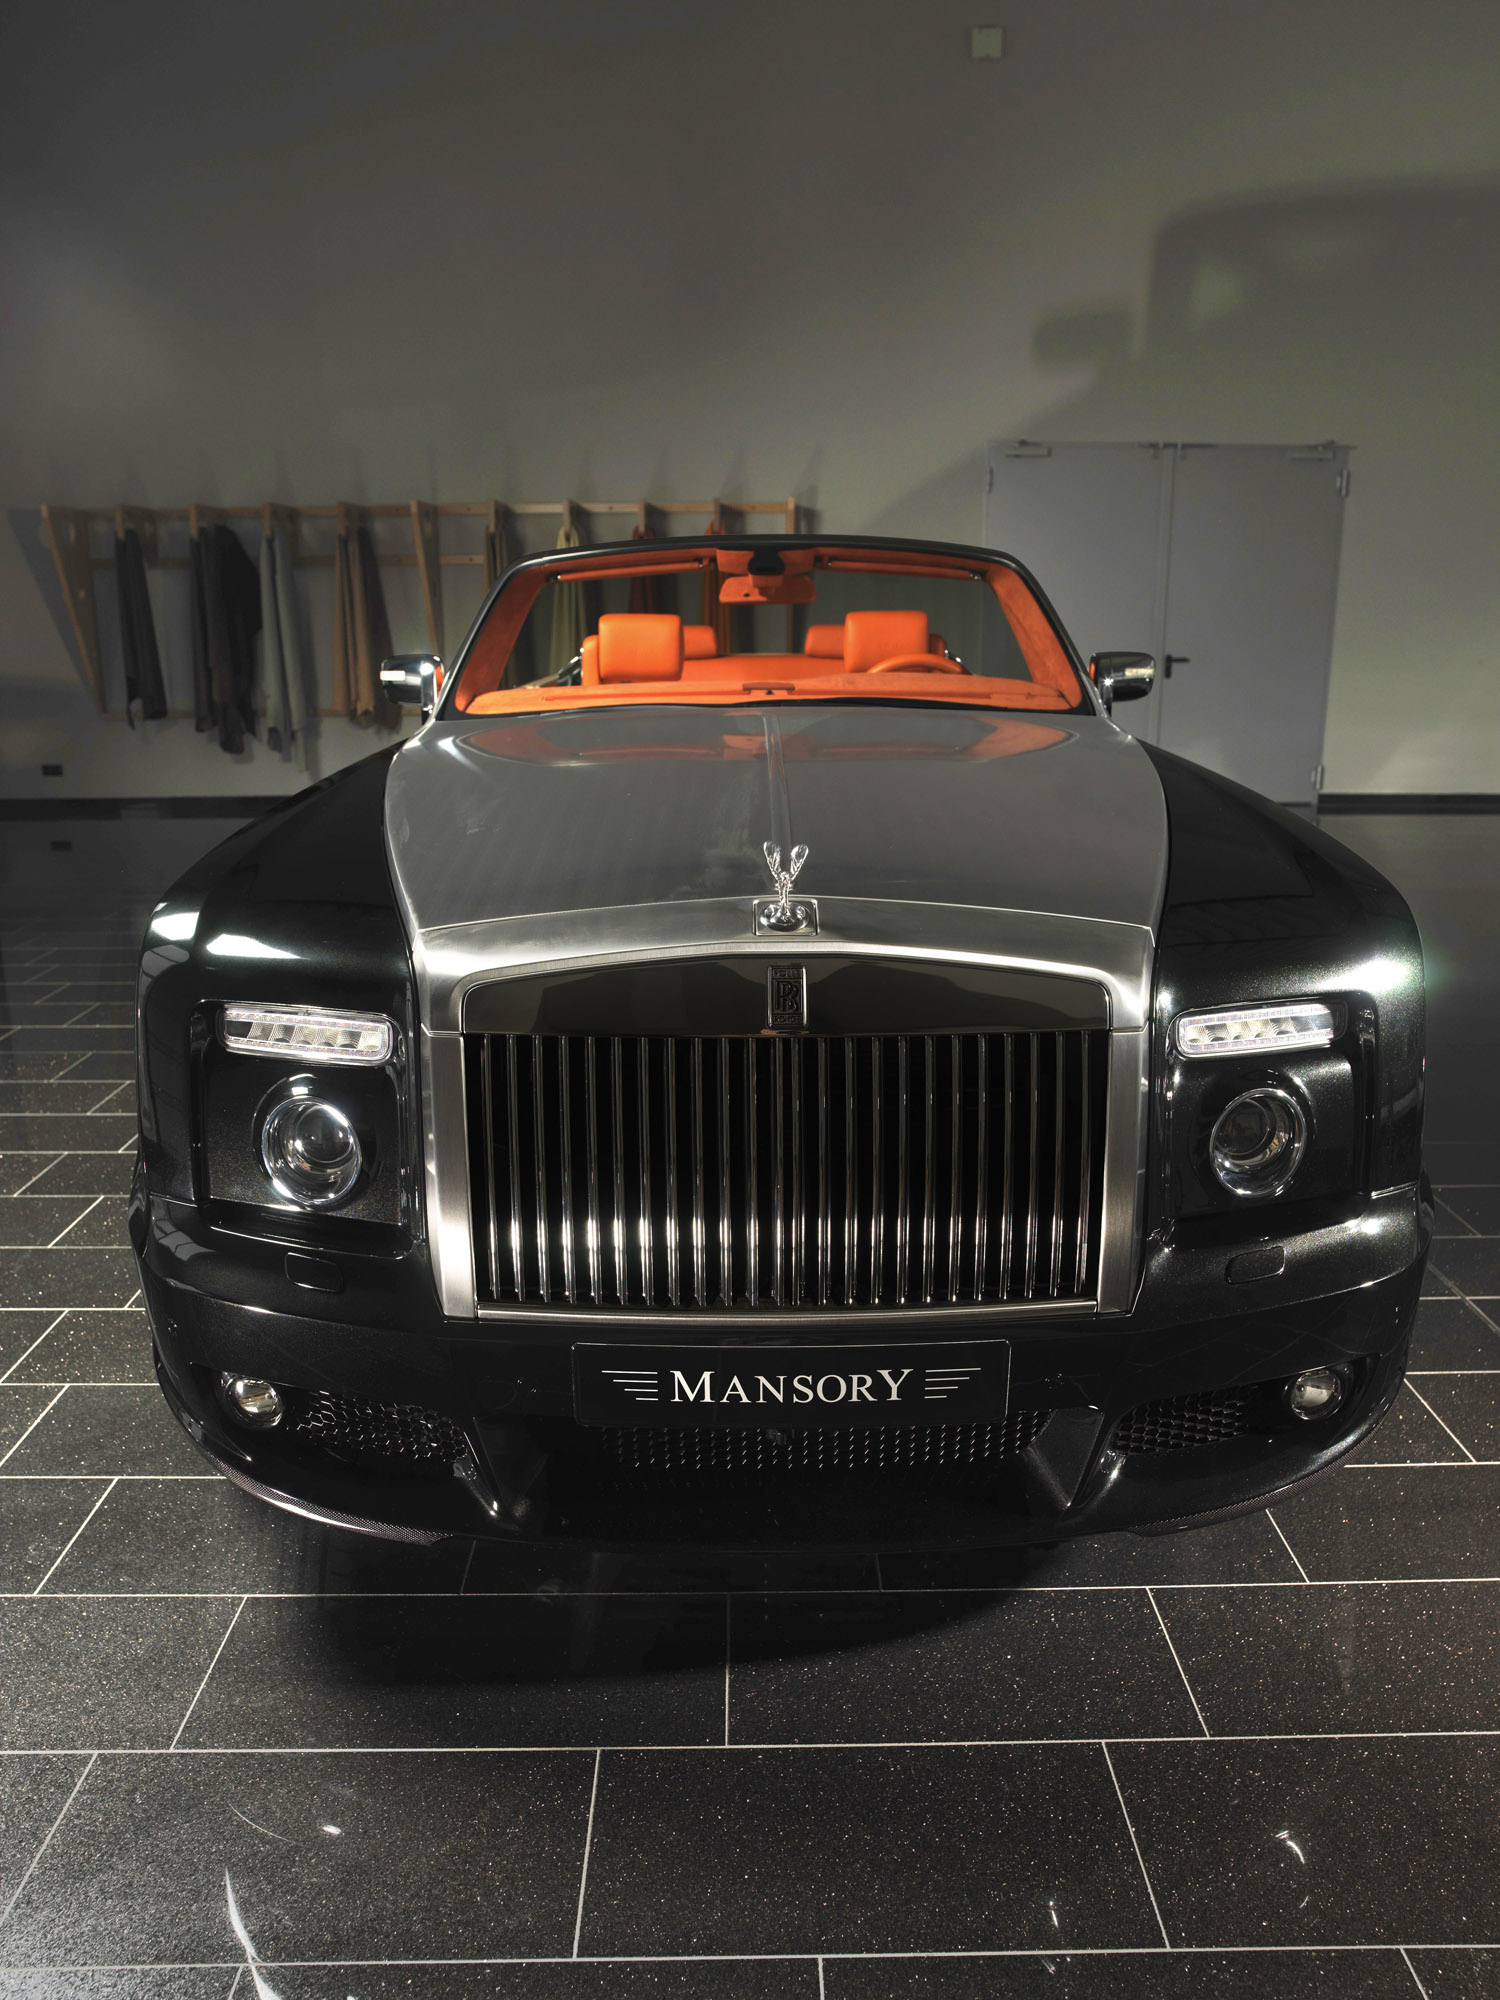 MANSORY Bel Air Rolls-Royce Drophead Coupe photo #1